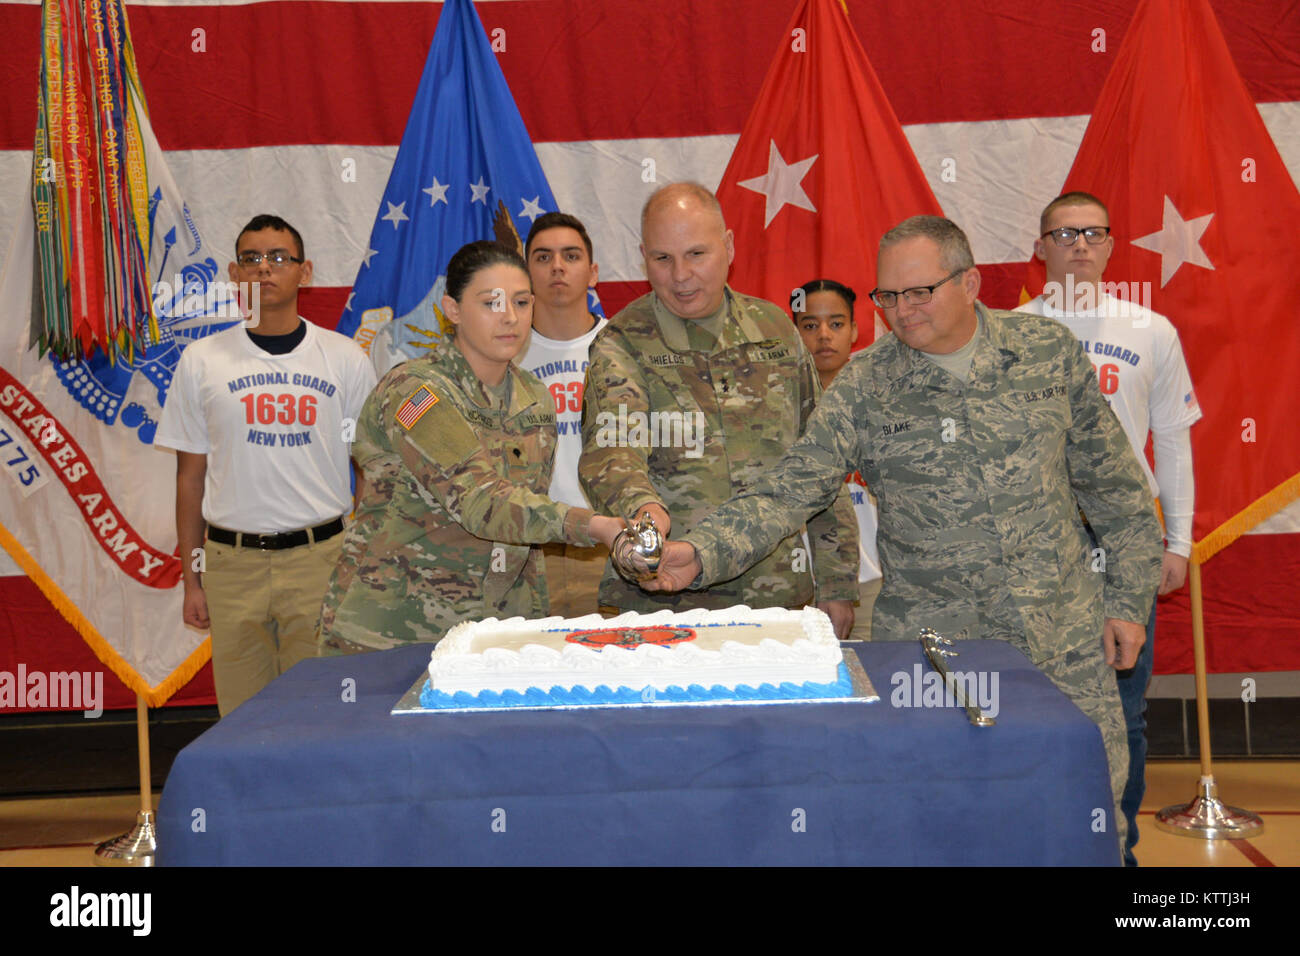 Maj. Gen. Raymond Shields, assistant adjutant general, Army, of New York (middle) joins the oldest and newest members of the New York National Guard to cut a cake in celebration of the National Guard’s 381th birthday at New York National Guard headquarters in Latham, N.Y. on December, 13 2017. The National Guard was established in 1636 and is the oldest military force in the Department of Defense. The new and old members are Spc. Jade Richards, age 19, New York Army National Guard (left); Chief Master Sgt. Michael Blake, one of the New York Air National Guard’s oldest serving Soldiers (right). Stock Photo